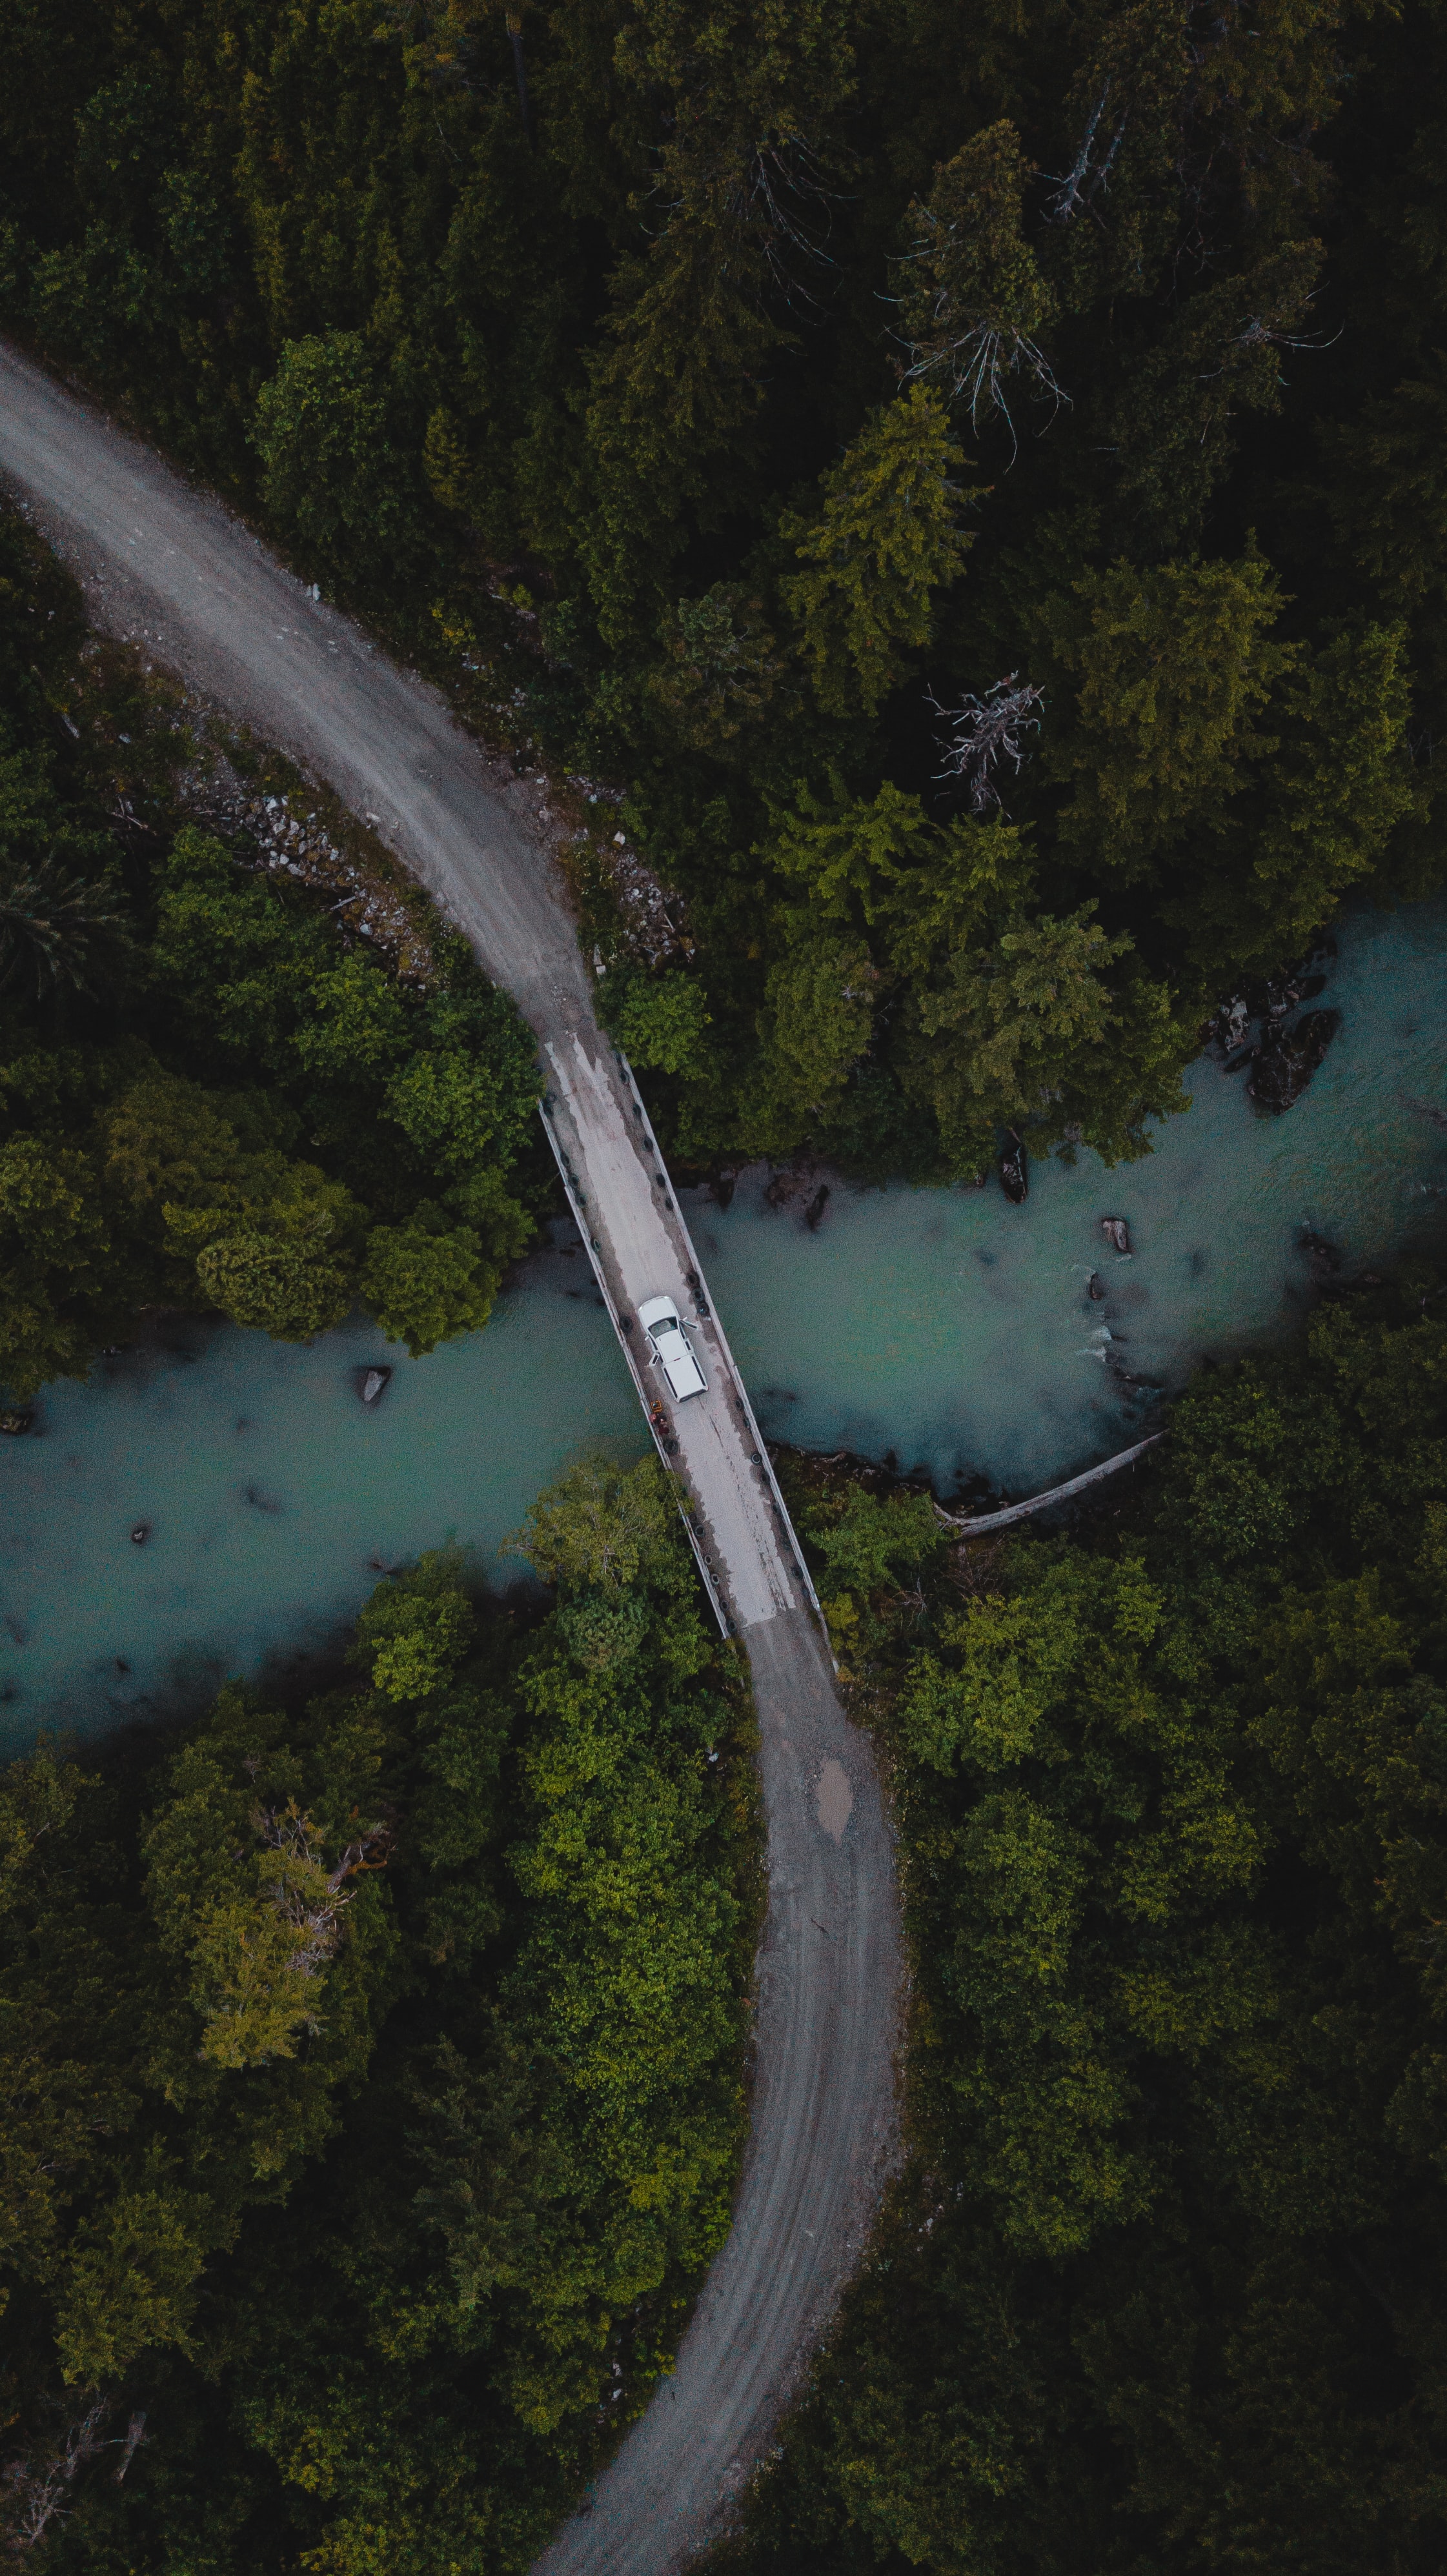 Desktop FHD rivers, nature, trees, view from above, forest, car, machine, bridge